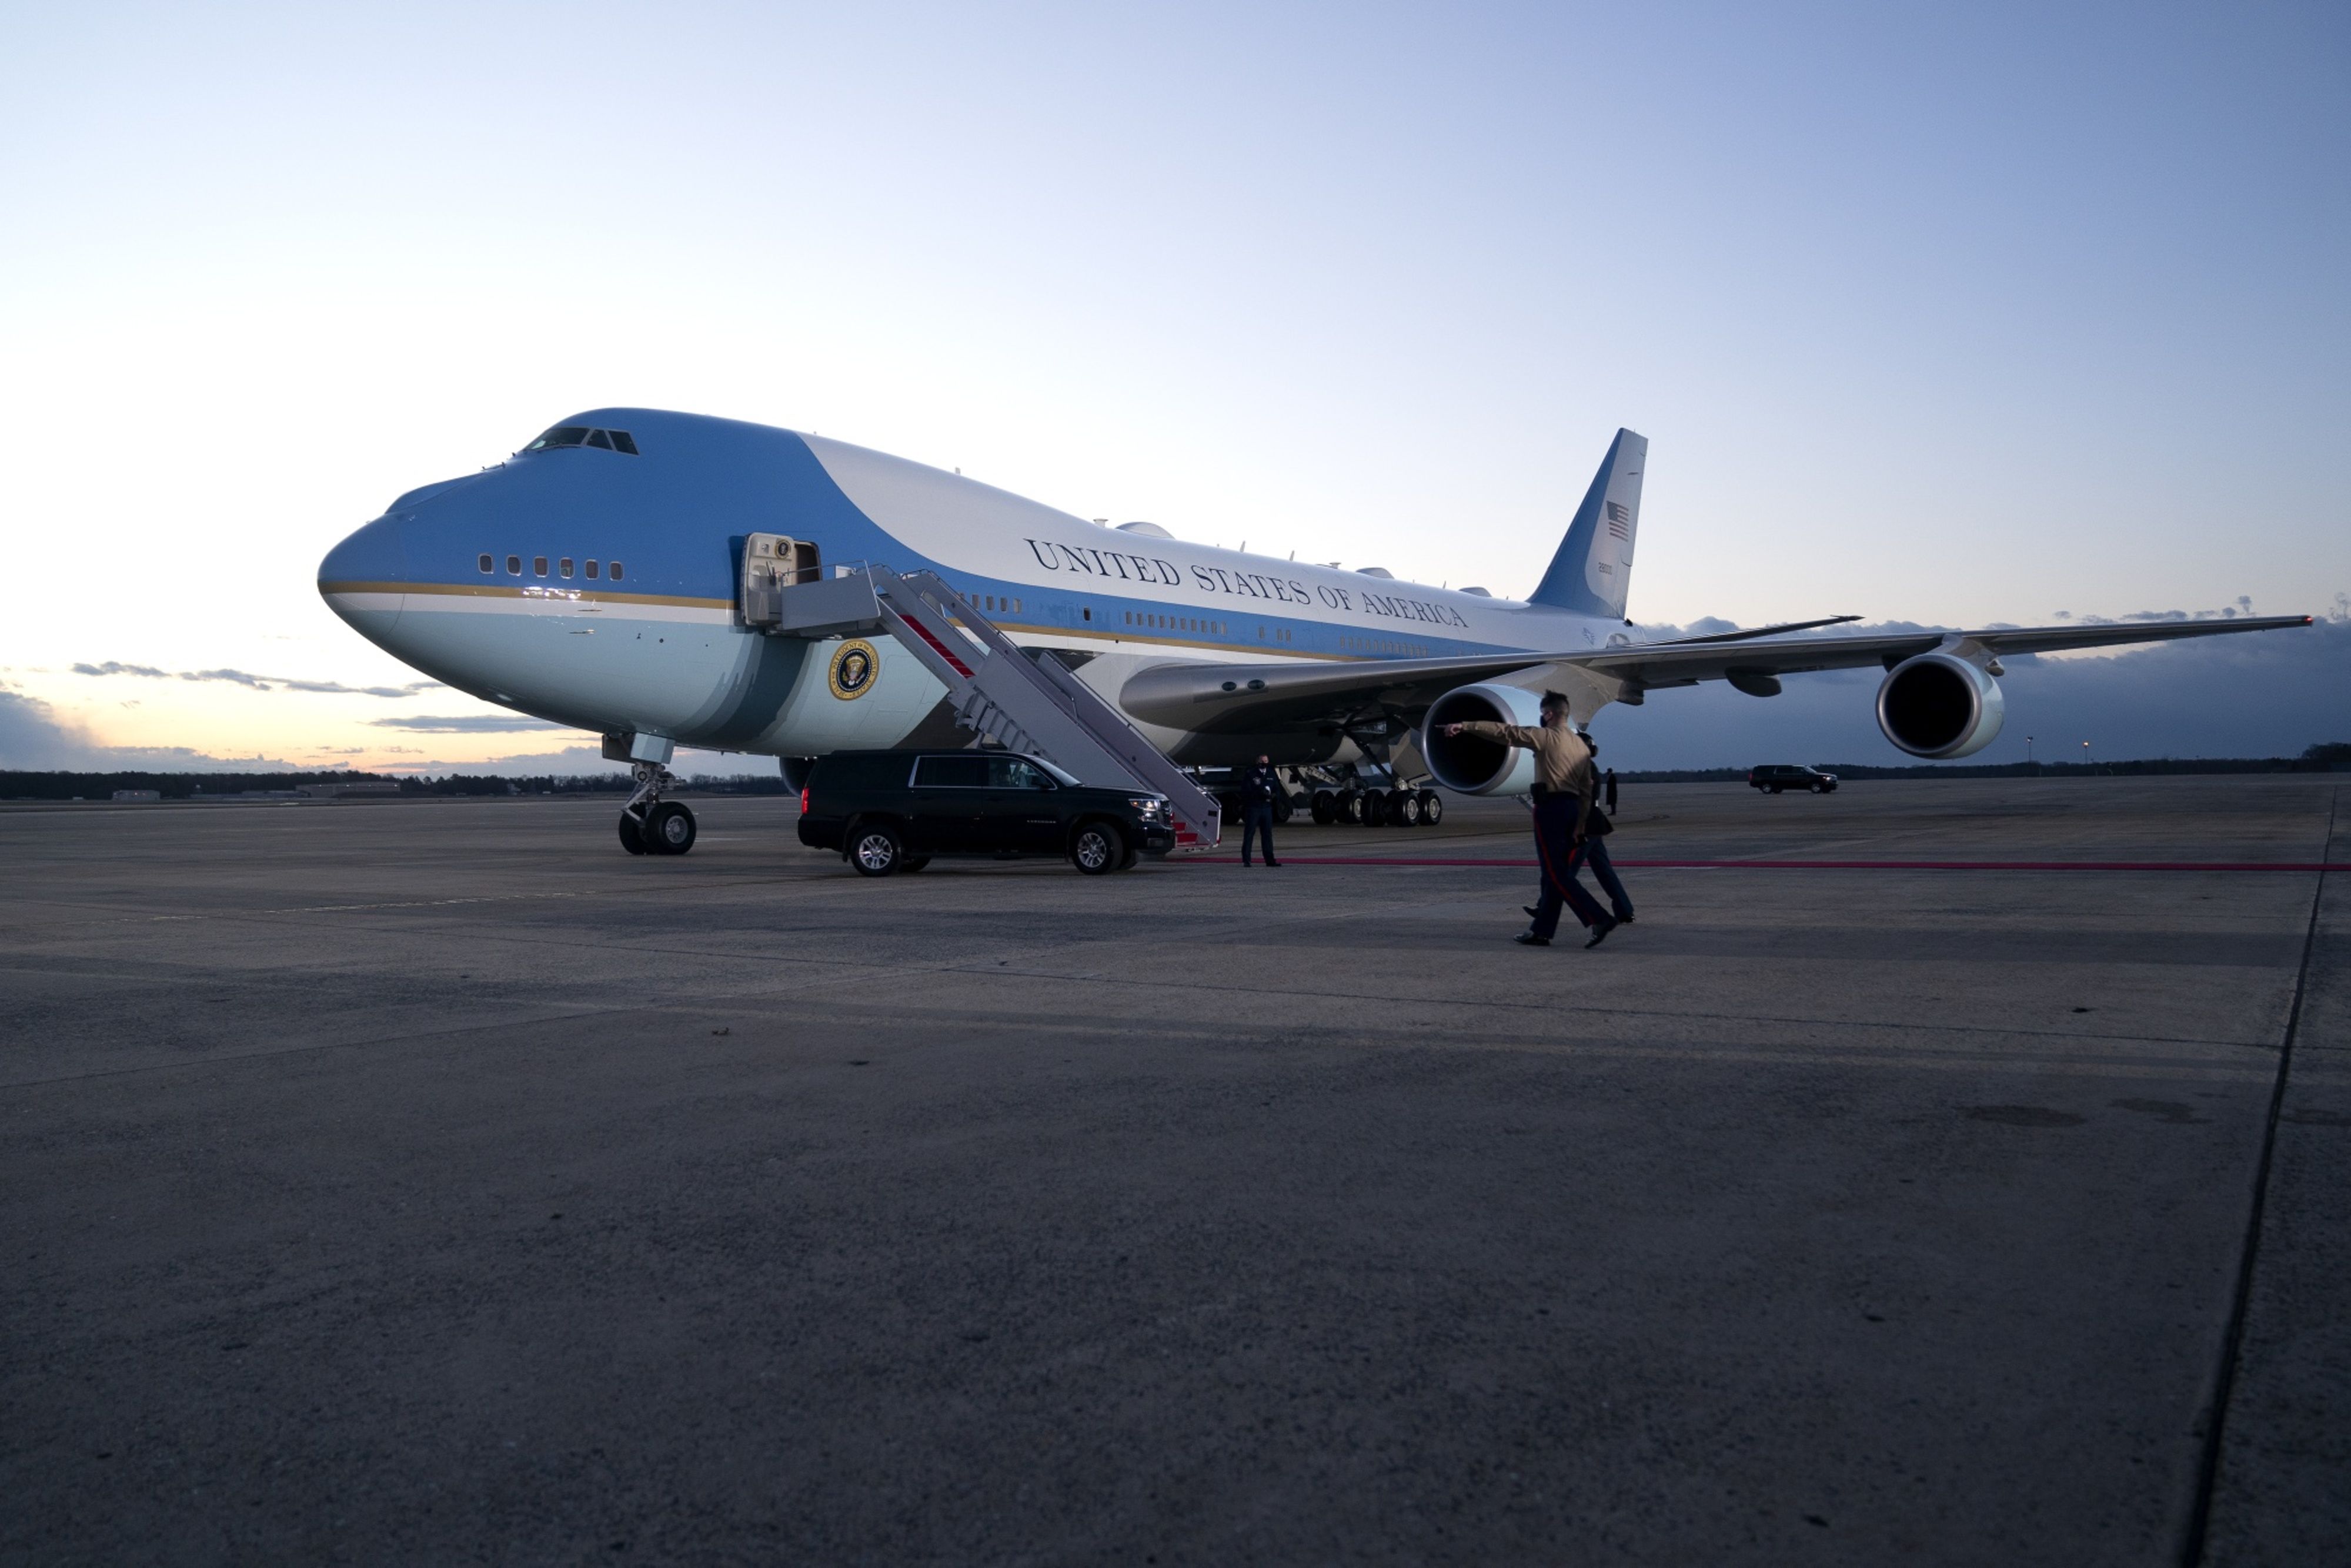 Breach at home base of Air Force One 